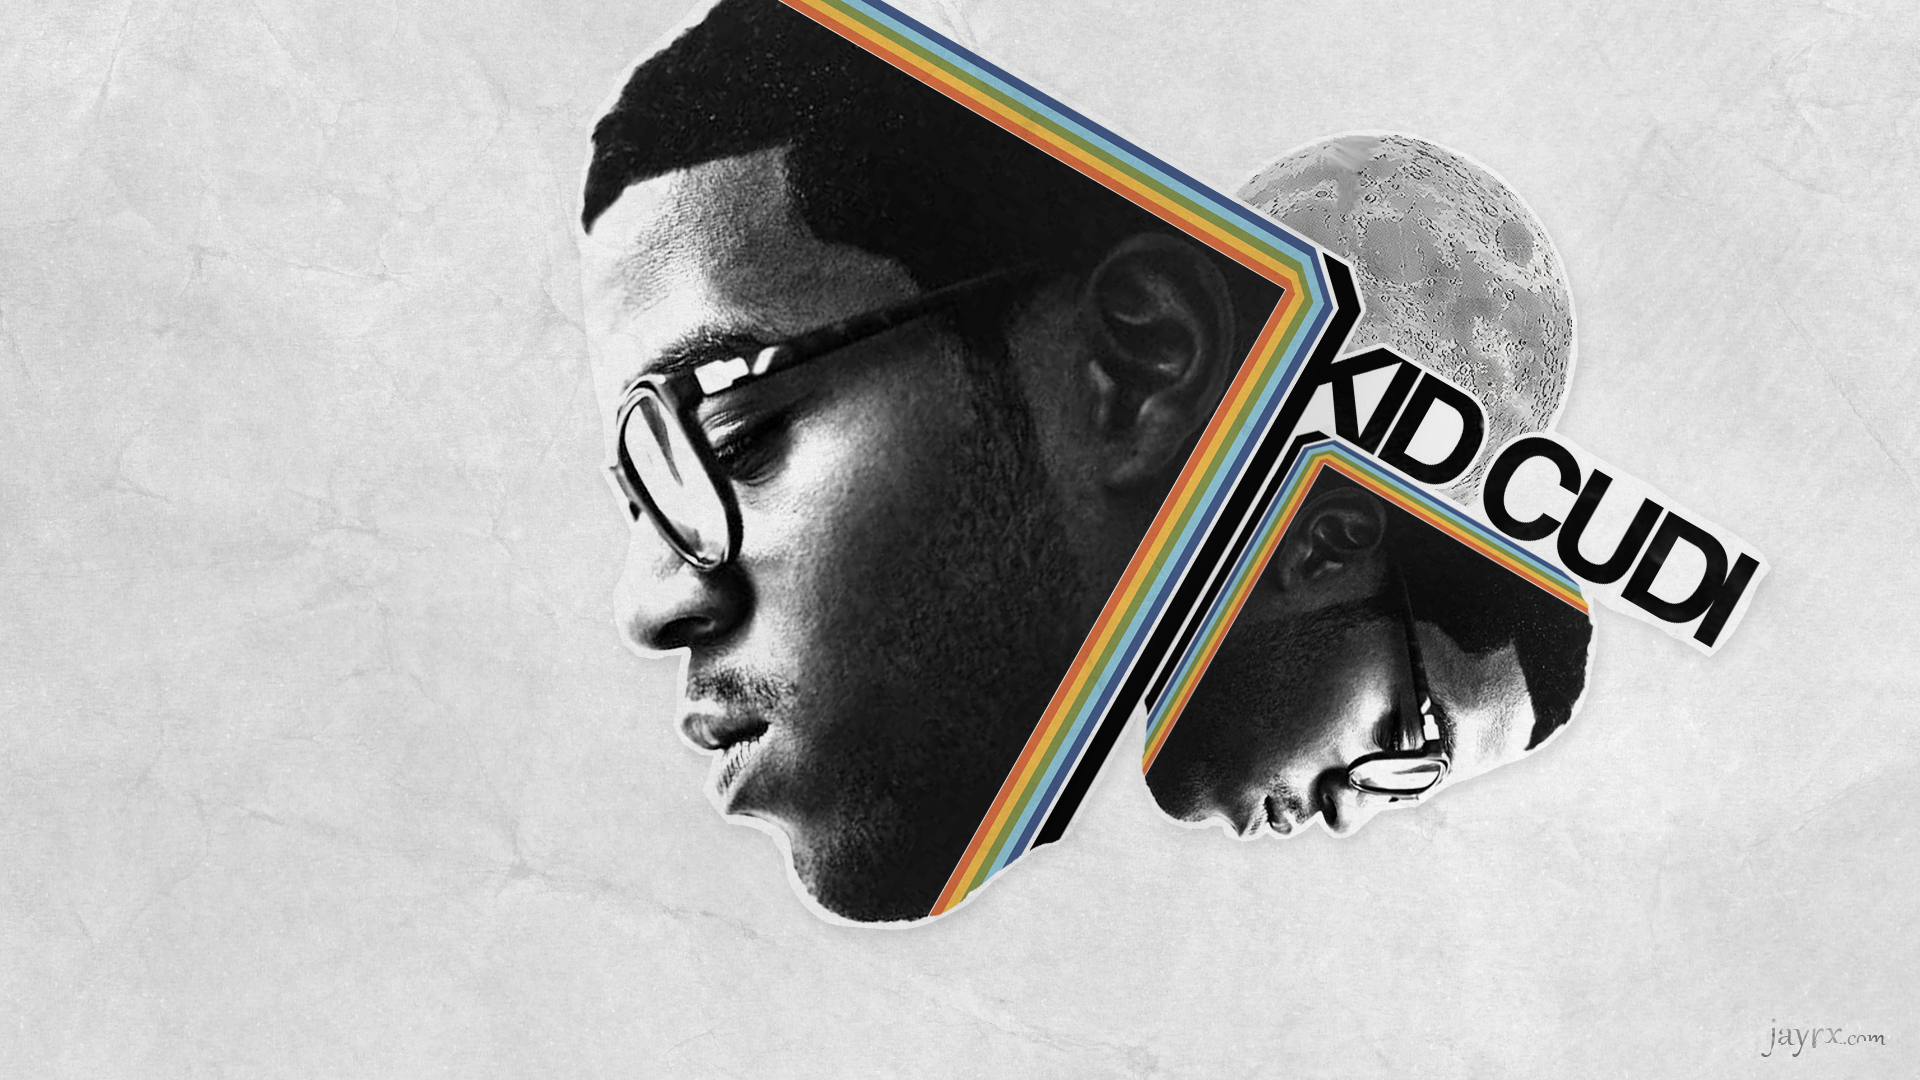 ... Outline of Color: Kid Cudi by jayrx